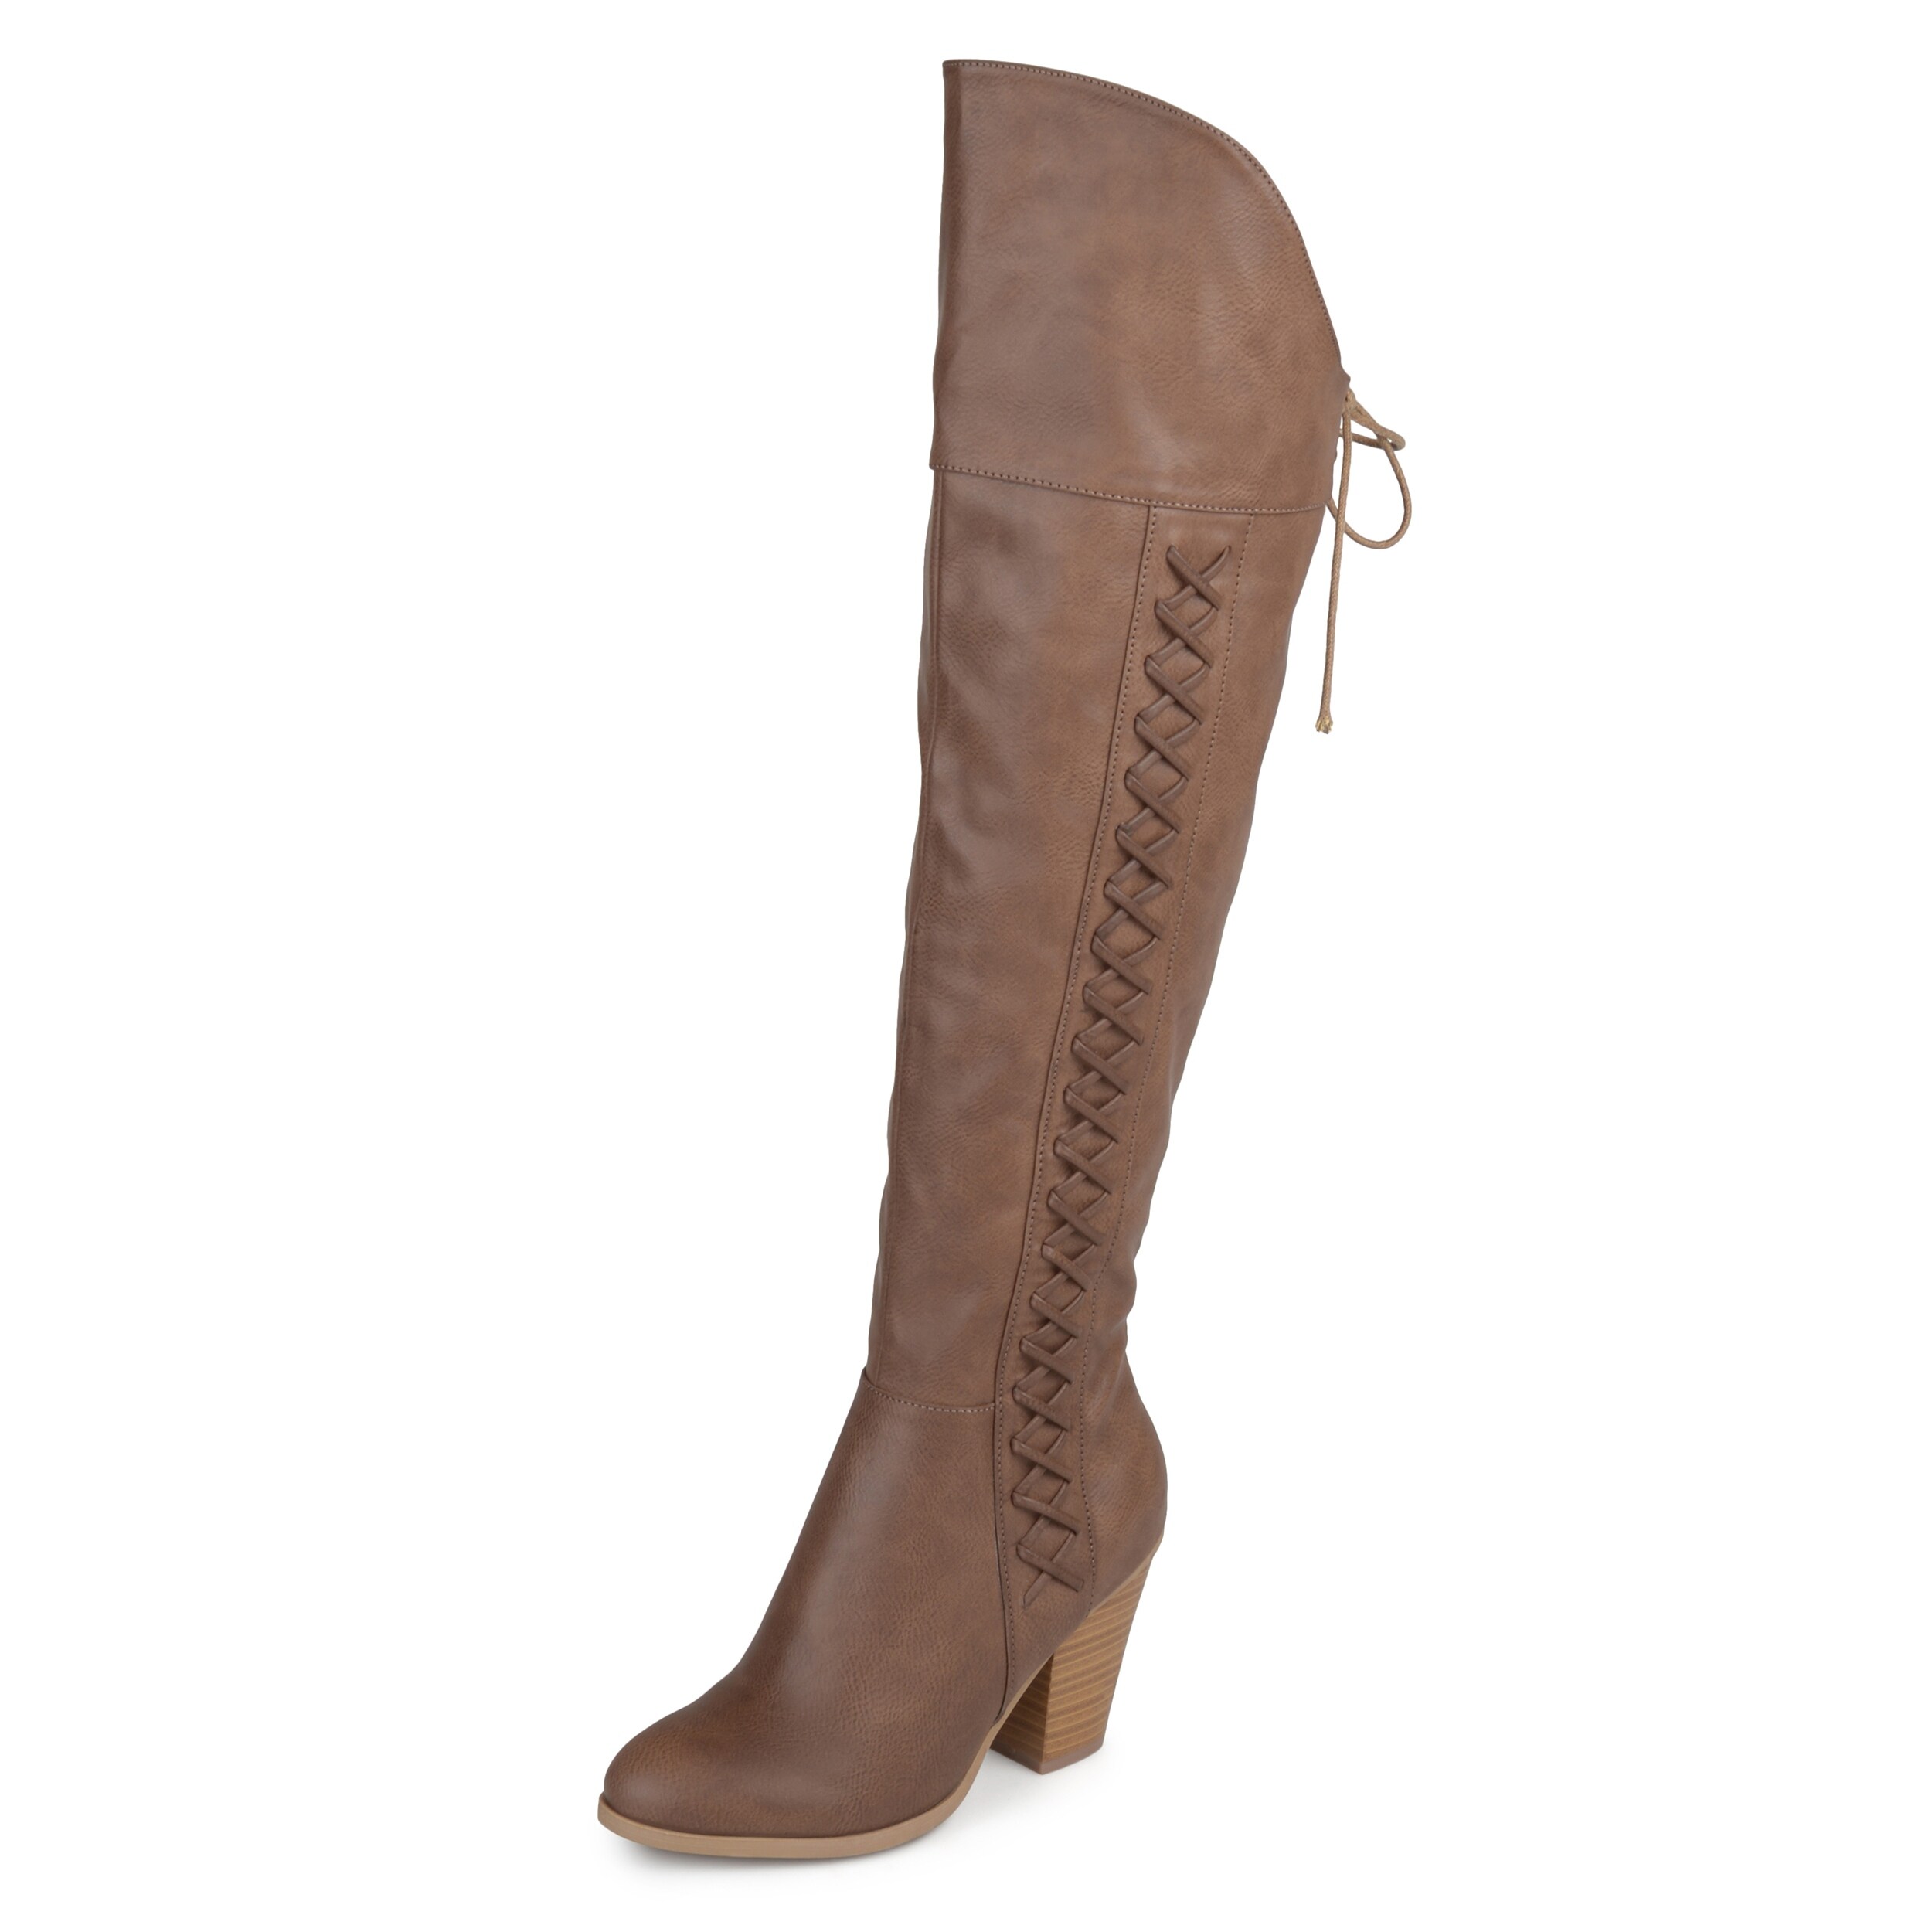 ugg boots womens sale journeys